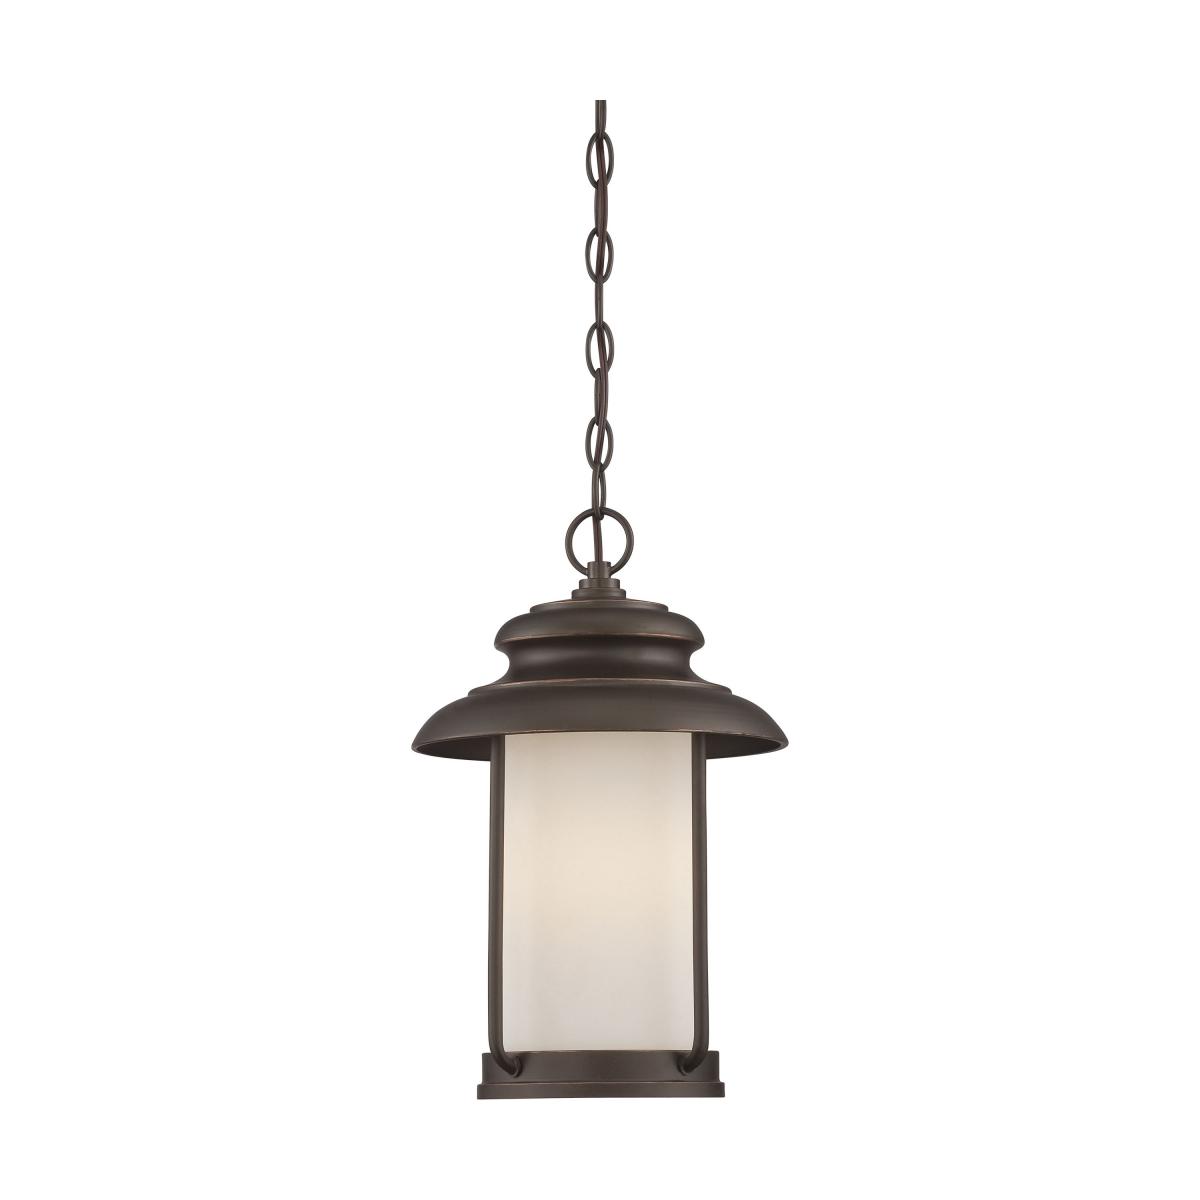 62-635 BETHANY LED OUTDOOR HANGING